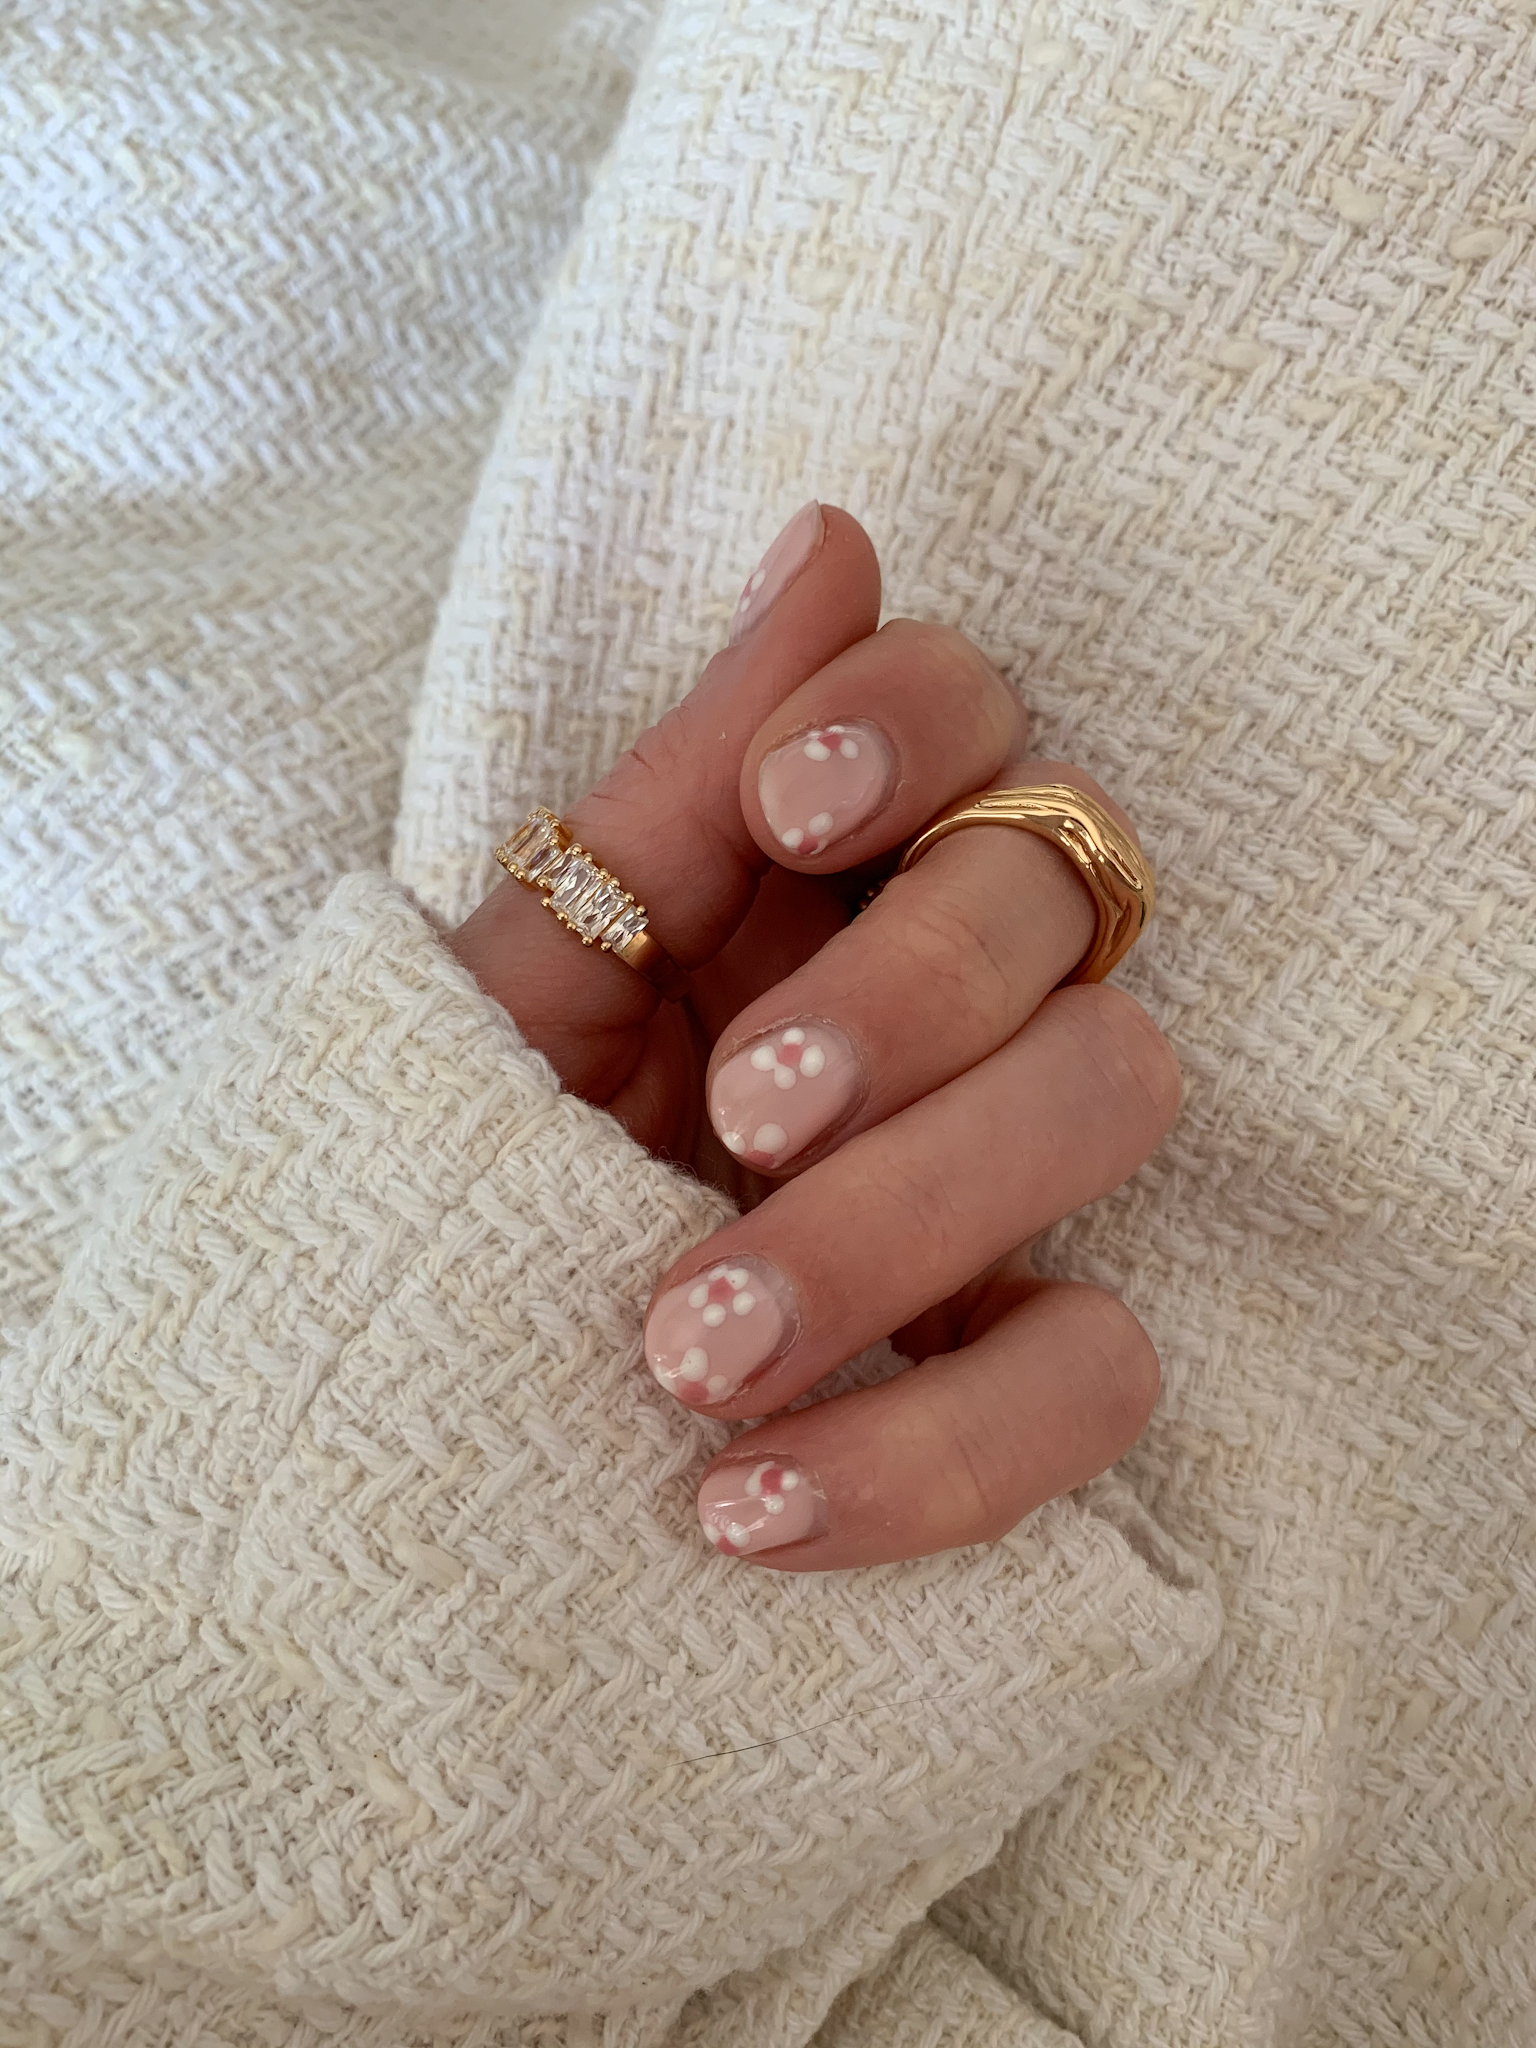 floral nails, alessandro striplac, pink nails, nude, Sif Jakobs, rings